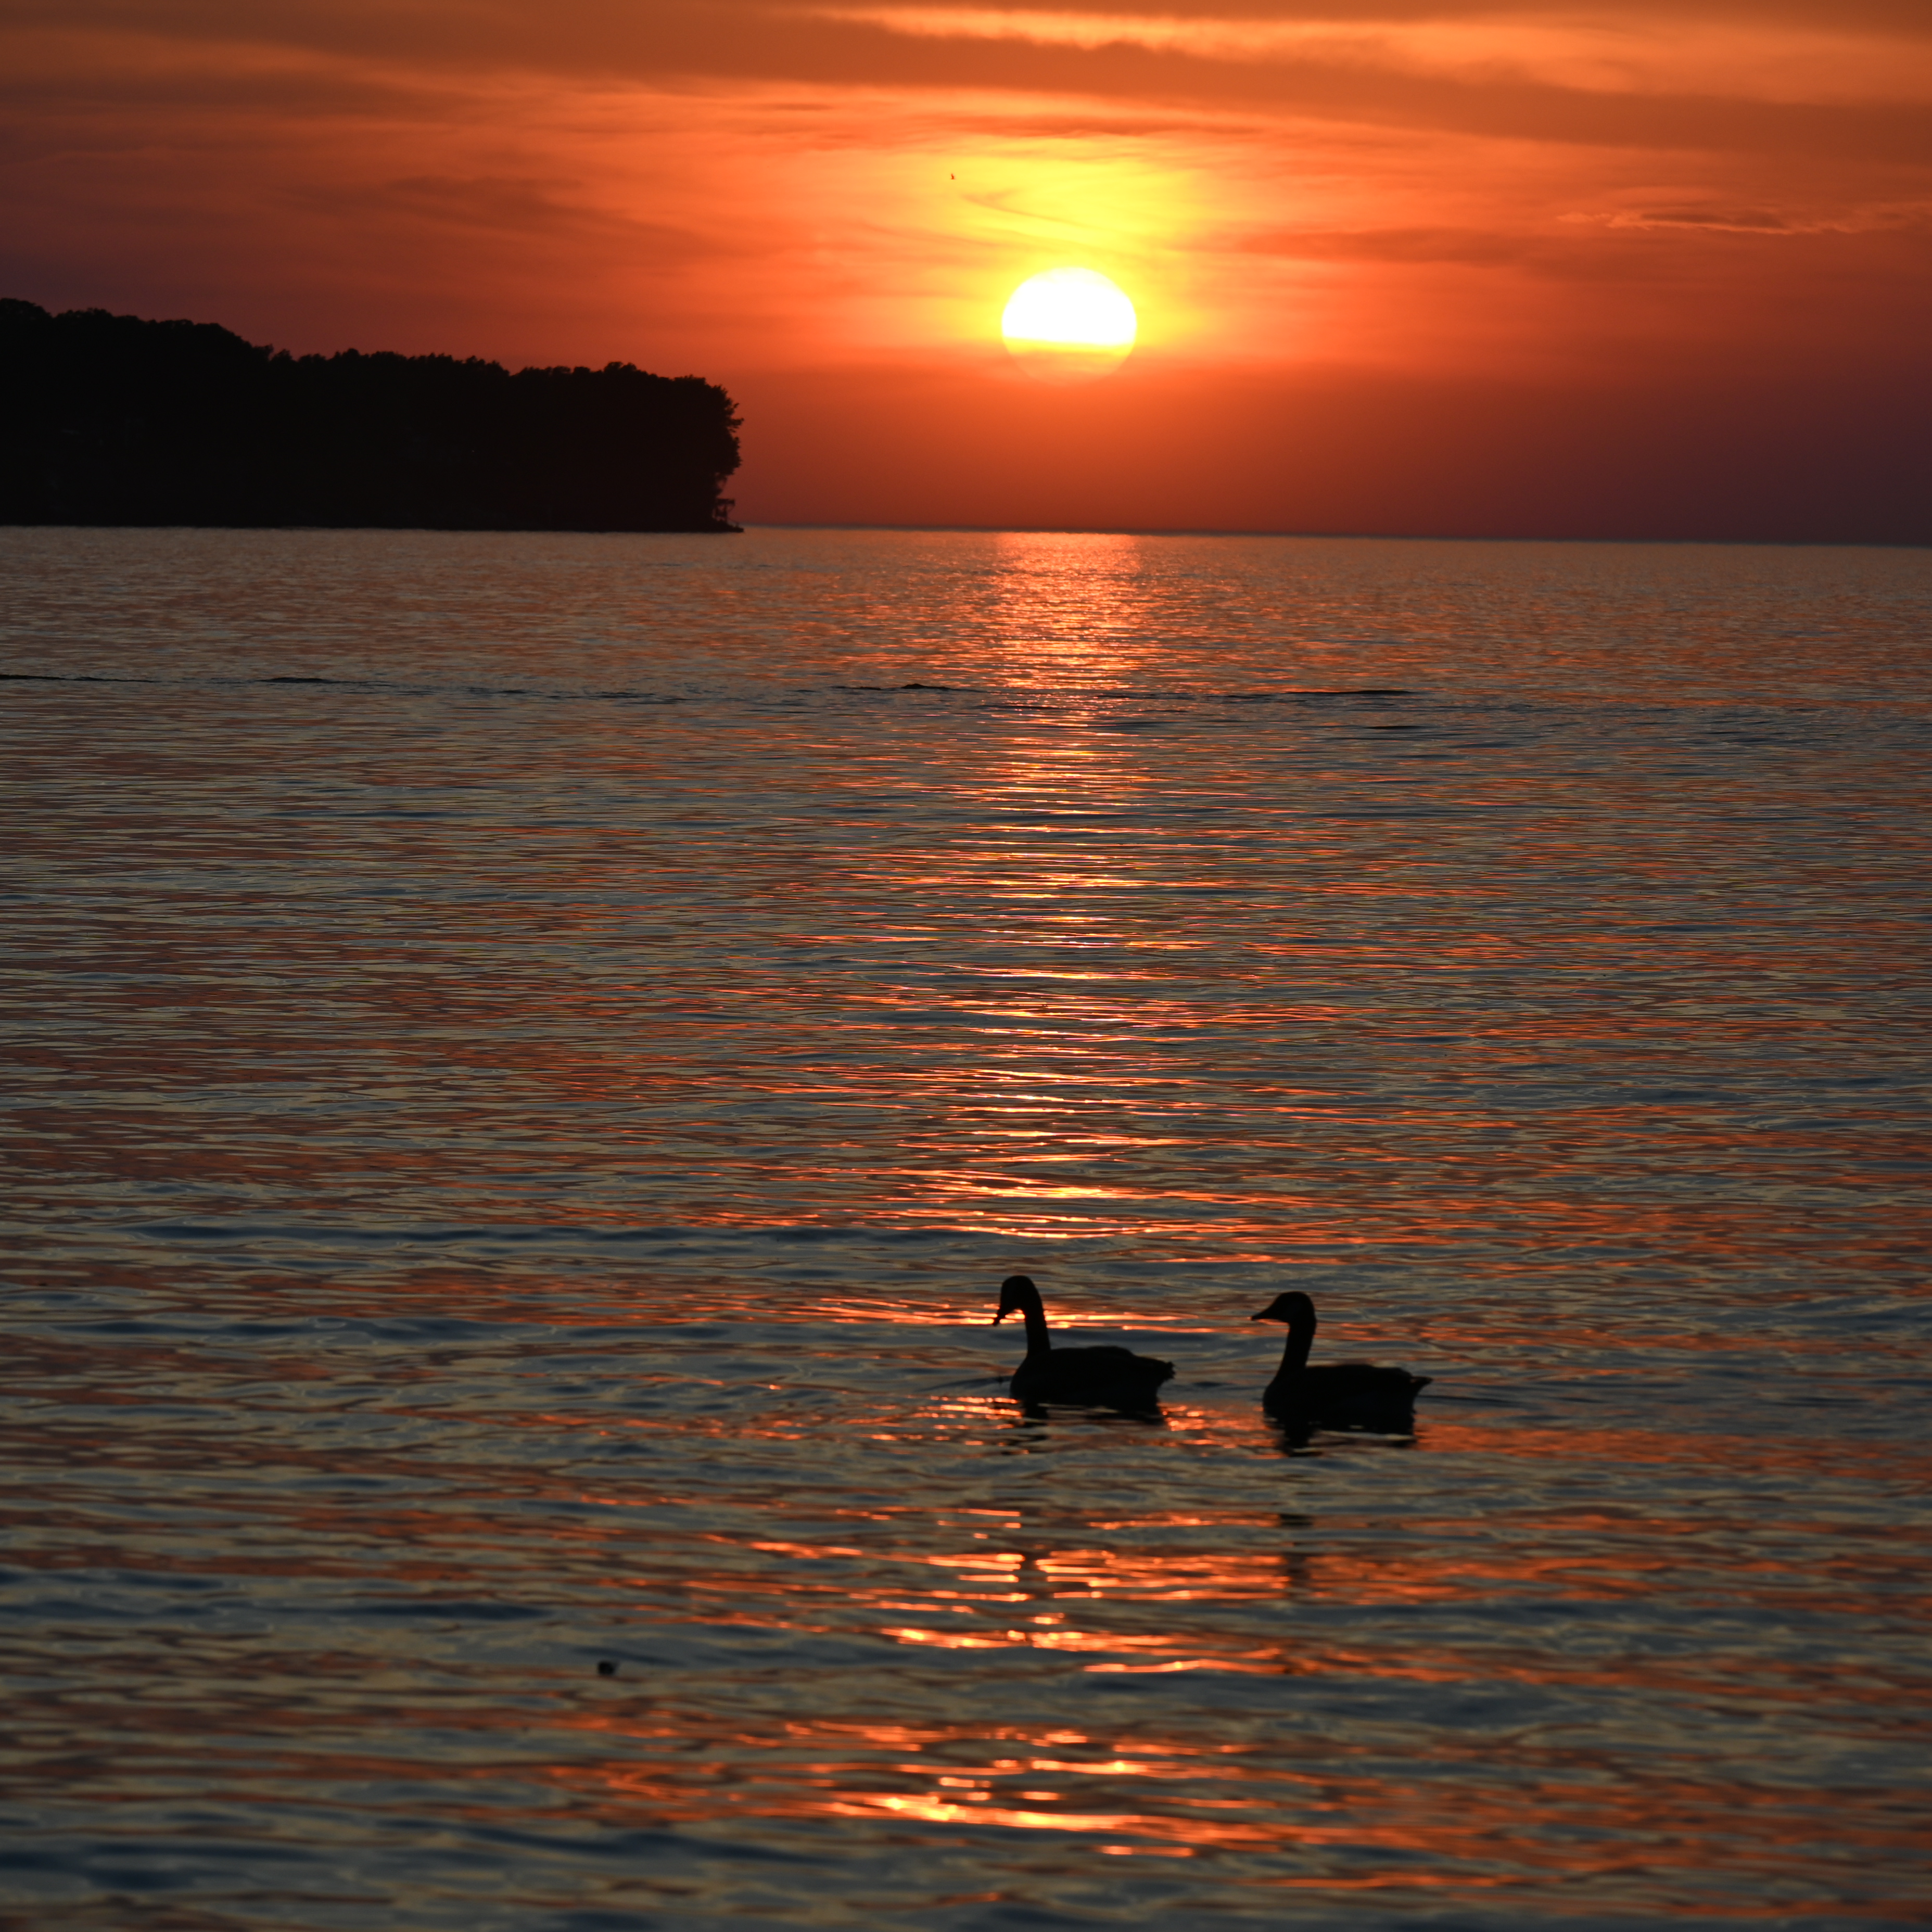 Two geese on the lake during an orange and yellow sunset.